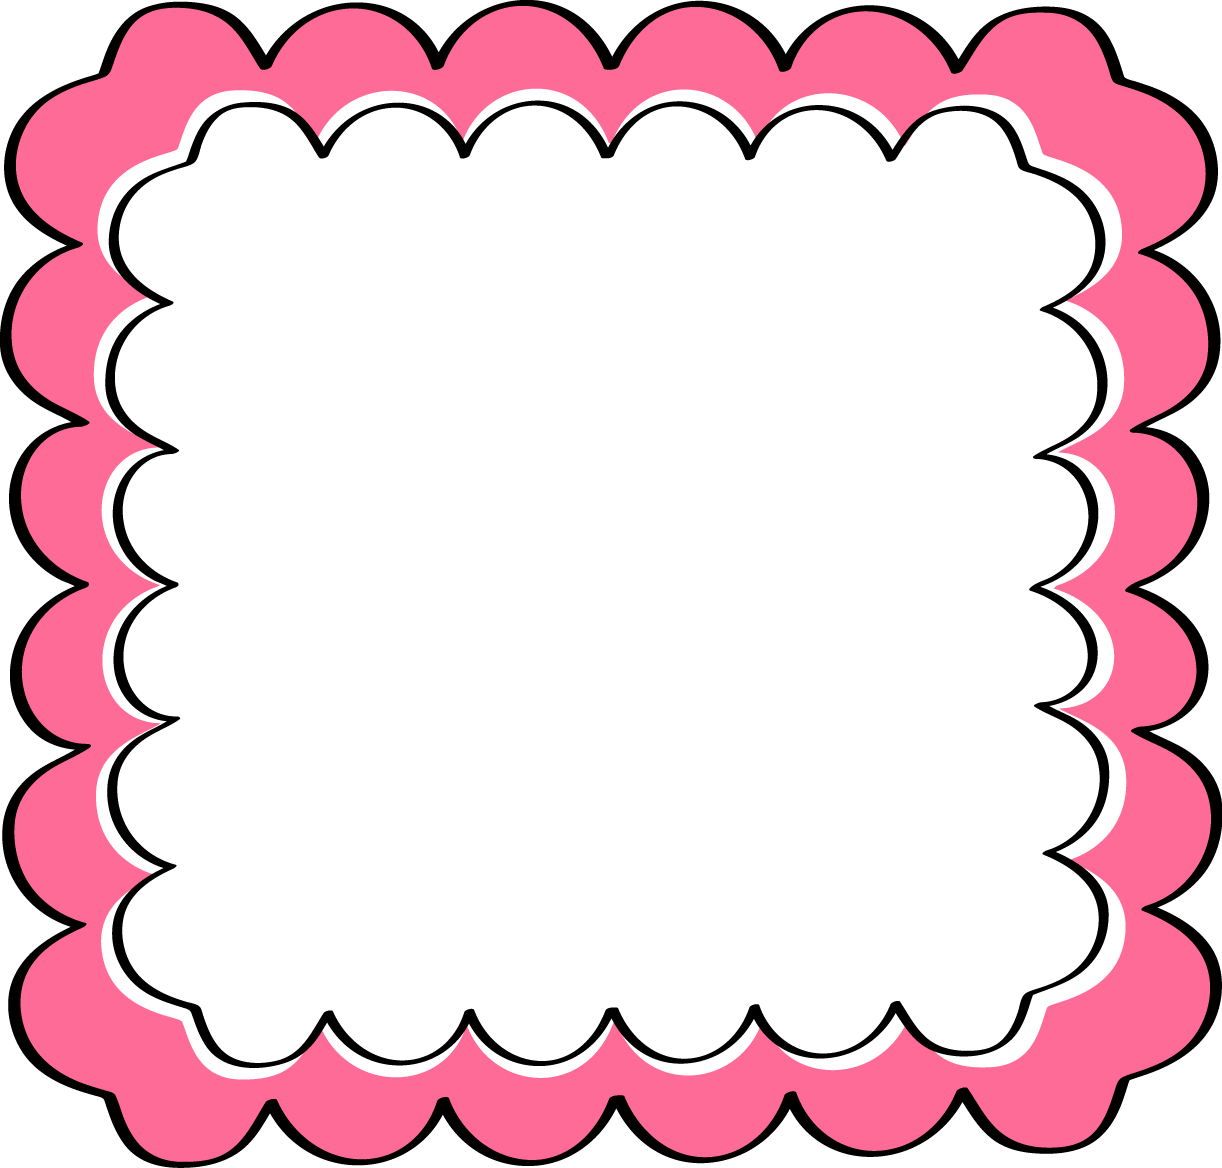 Free Pink Borders Cliparts, Download Free Clip Art, Free